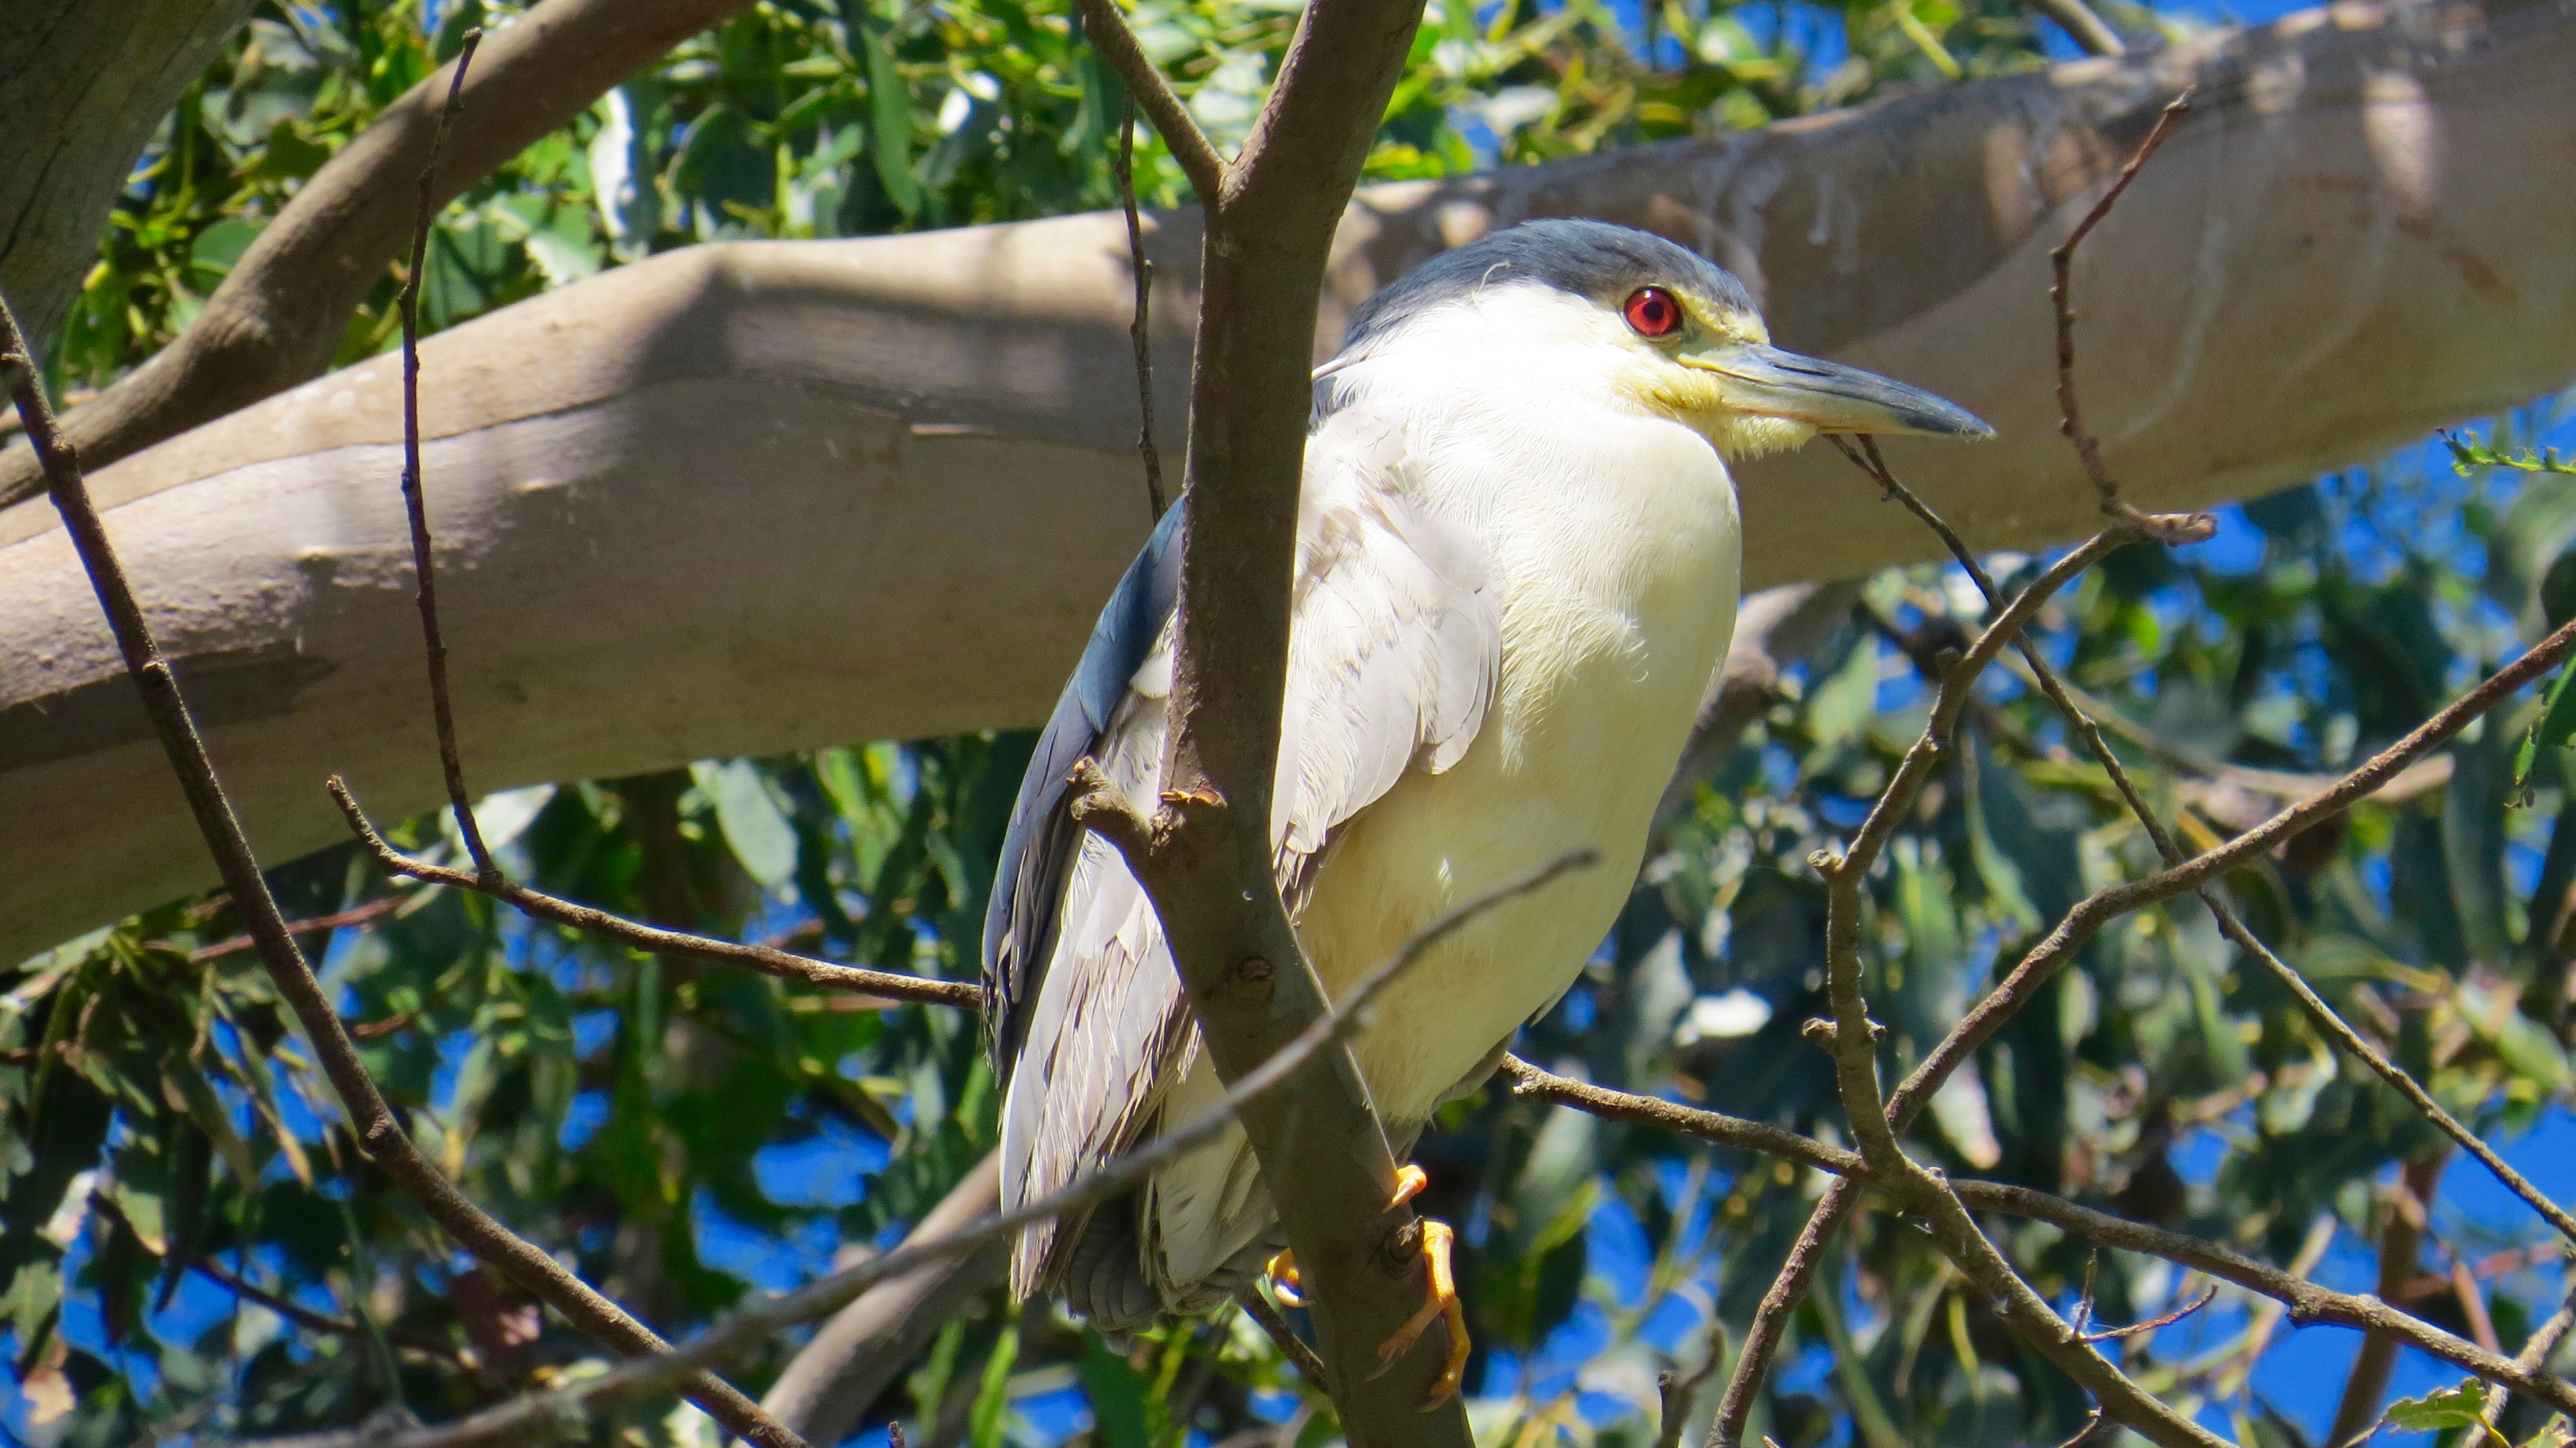 The Black-crowned Night Heron hangs out during the day and forages at night.